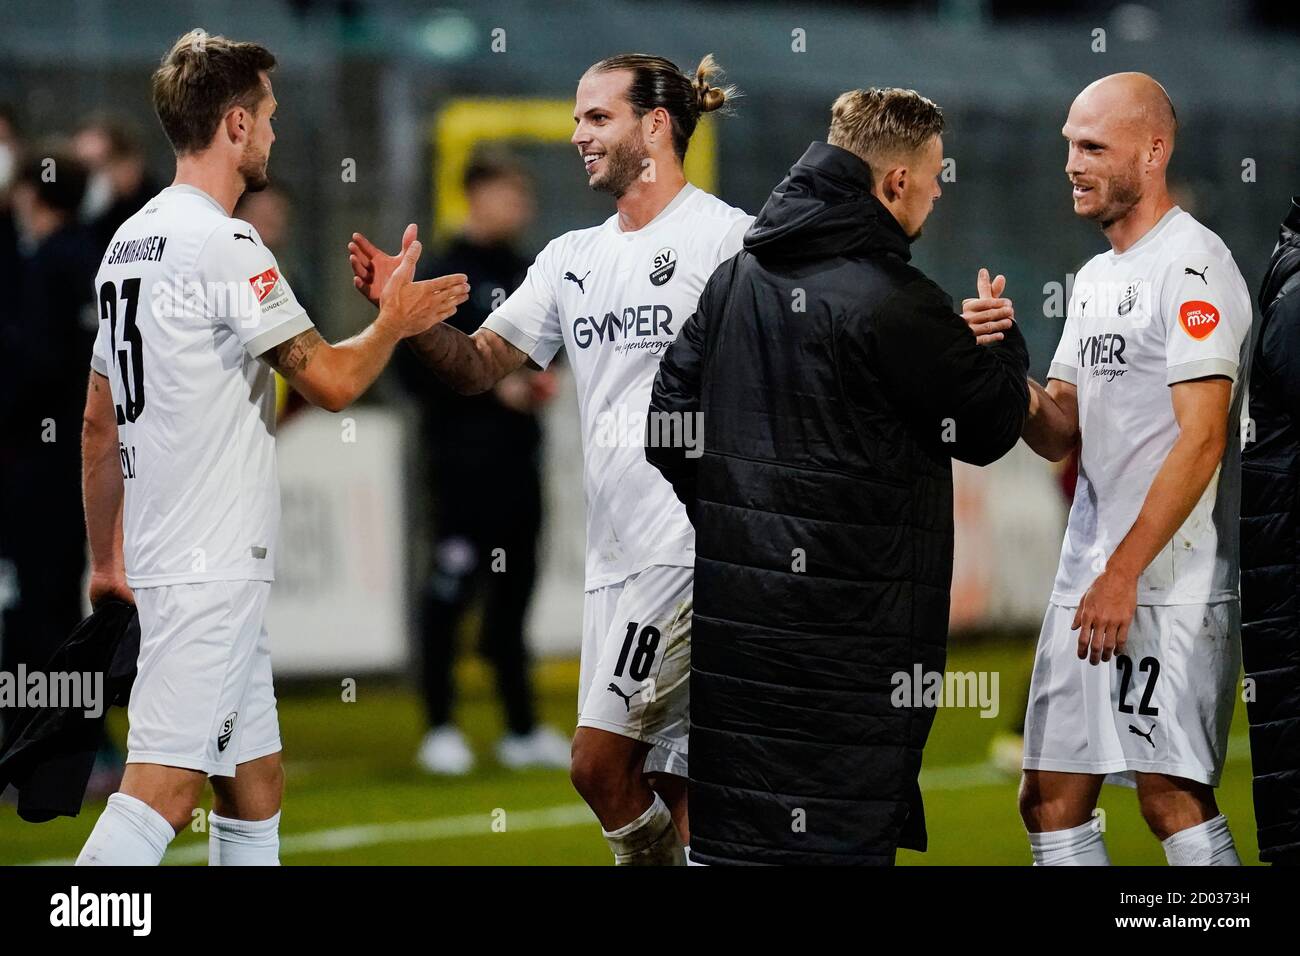 Sandhausen, Germany. 02nd Oct, 2020. Football: 2nd Bundesliga, SV Sandhausen - FC St. Pauli, 3rd matchday, Hardtwaldstadion. Sandhausen's Dennis Diekmeier (2nd from left) cheers for victory with Sandhausen's Nils Röseler (l). Credit: Uwe Anspach/dpa - IMPORTANT NOTE: In accordance with the regulations of the DFL Deutsche Fußball Liga and the DFB Deutscher Fußball-Bund, it is prohibited to exploit or have exploited in the stadium and/or from the game taken photographs in the form of sequence images and/or video-like photo series./dpa/Alamy Live News Stock Photo